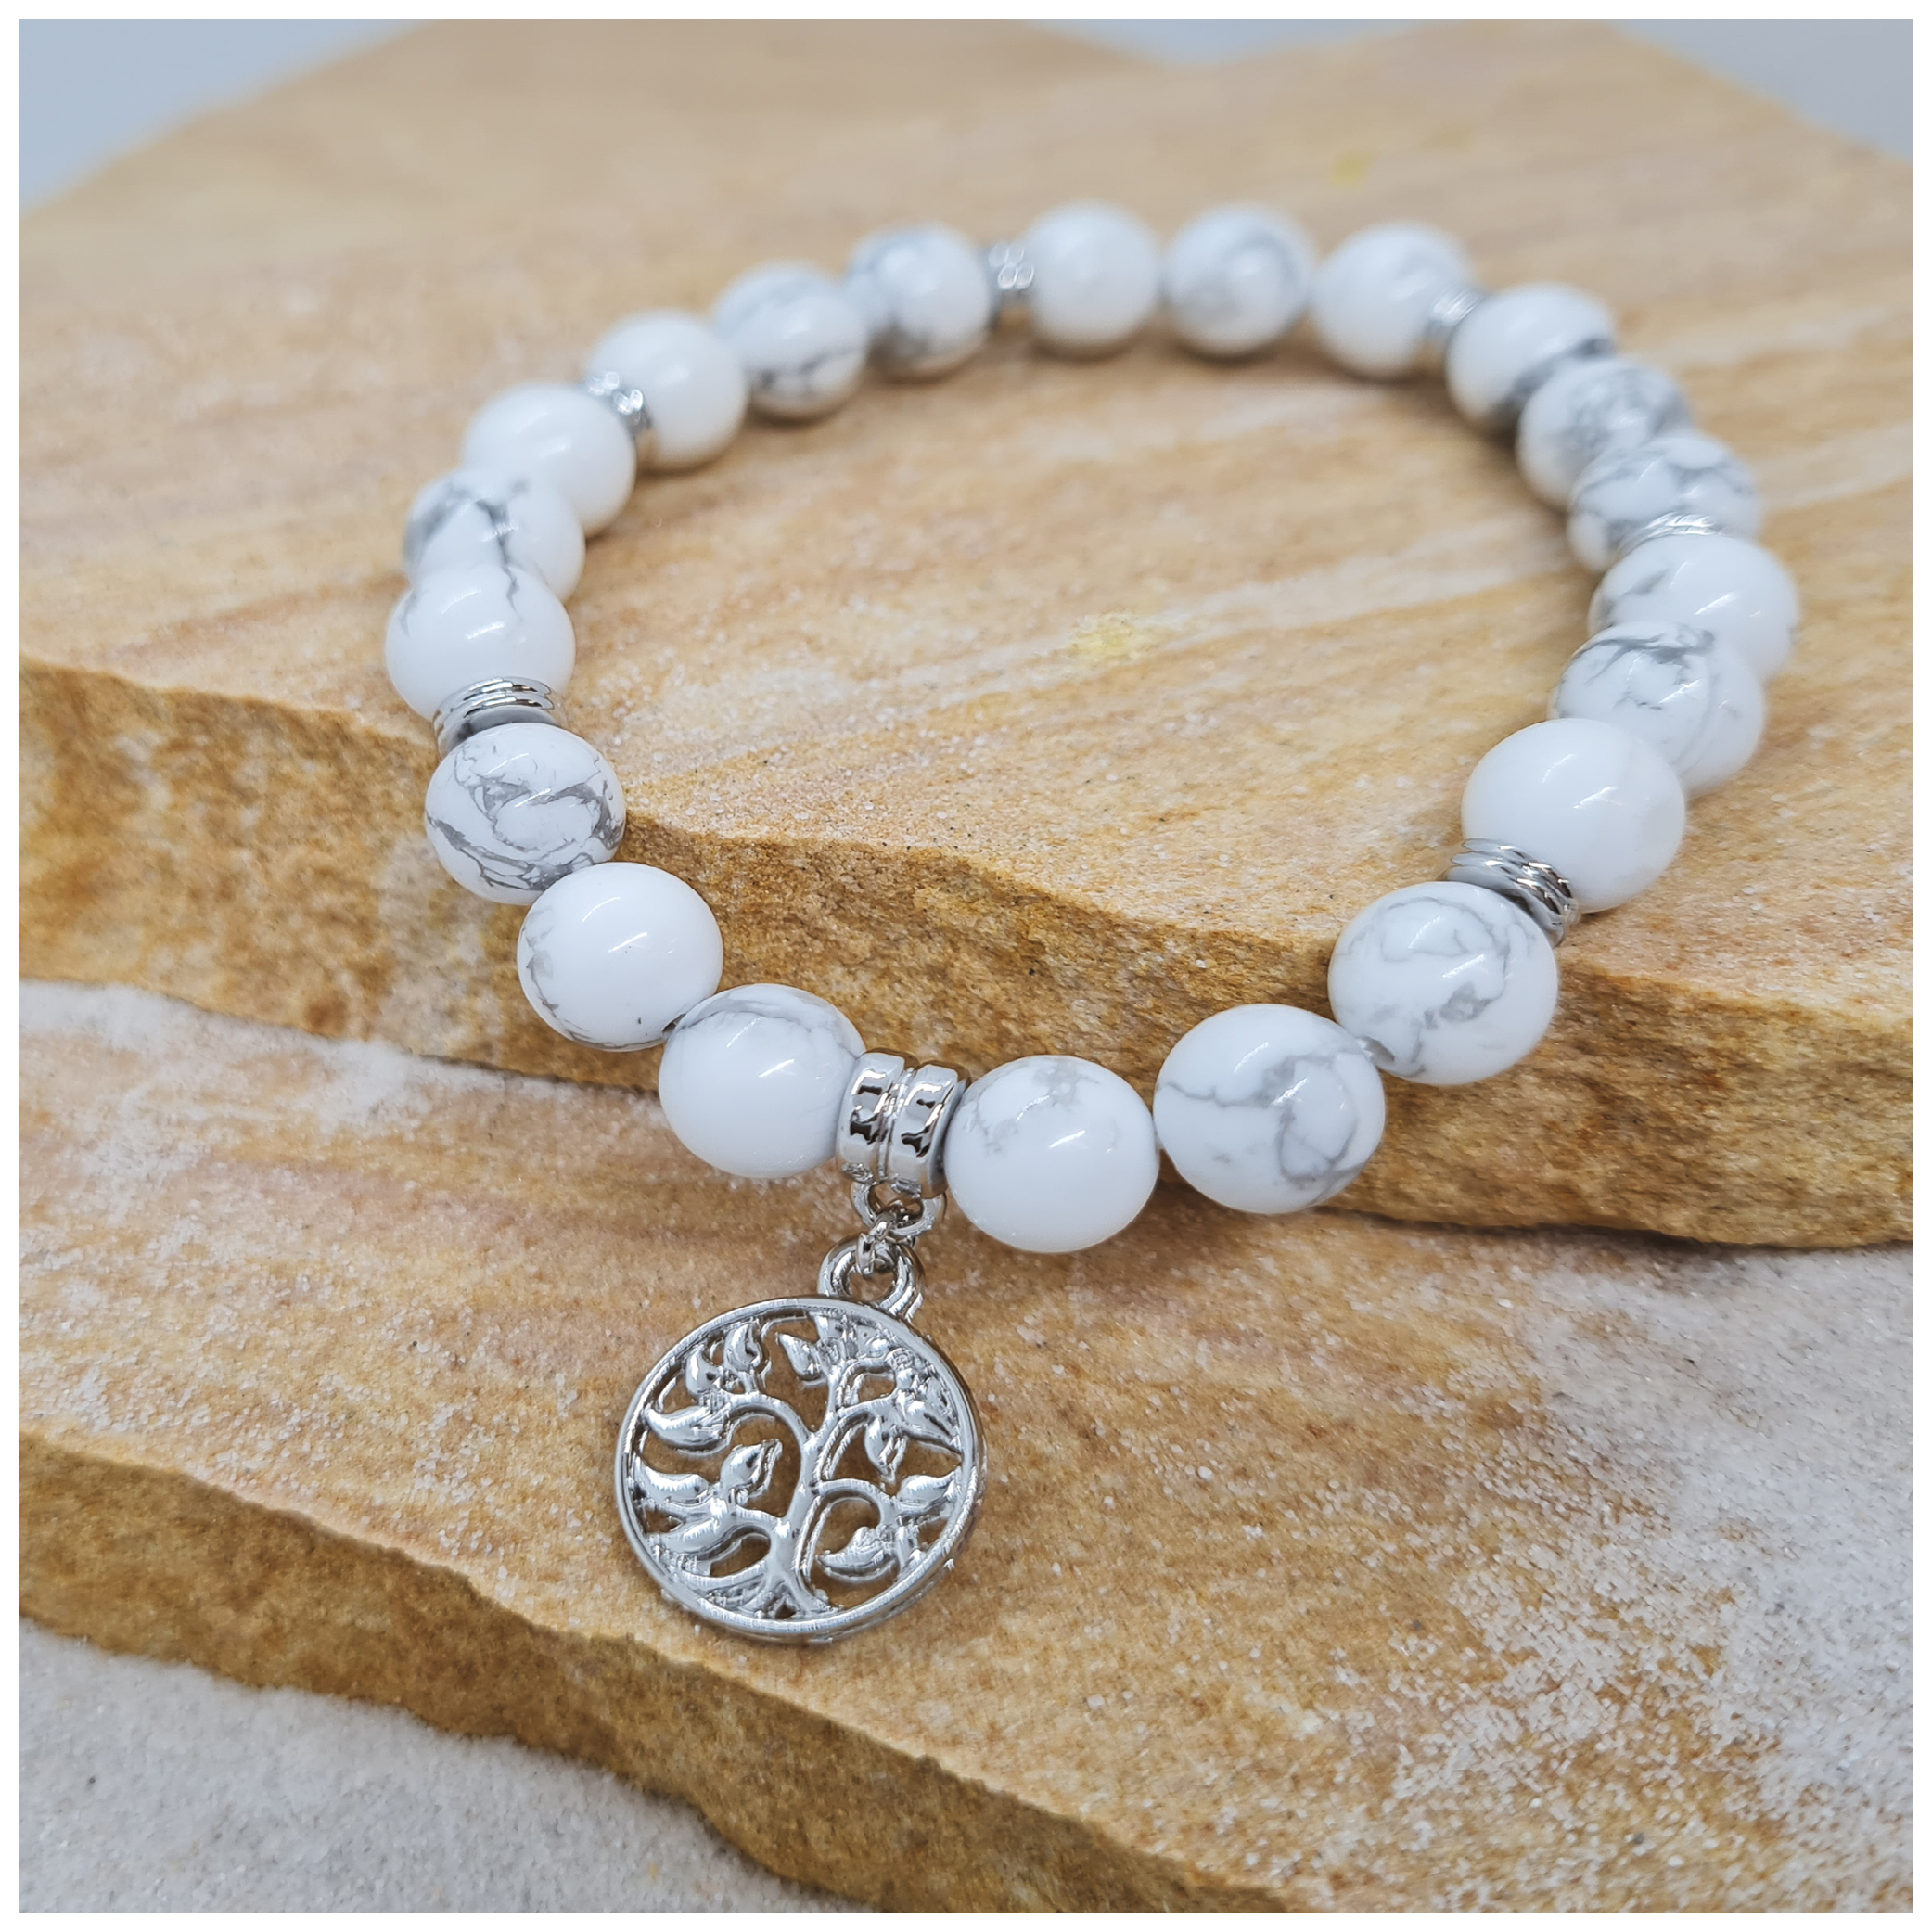 White Howlite 8mm crystal bead bracelet with silver tree of life charm